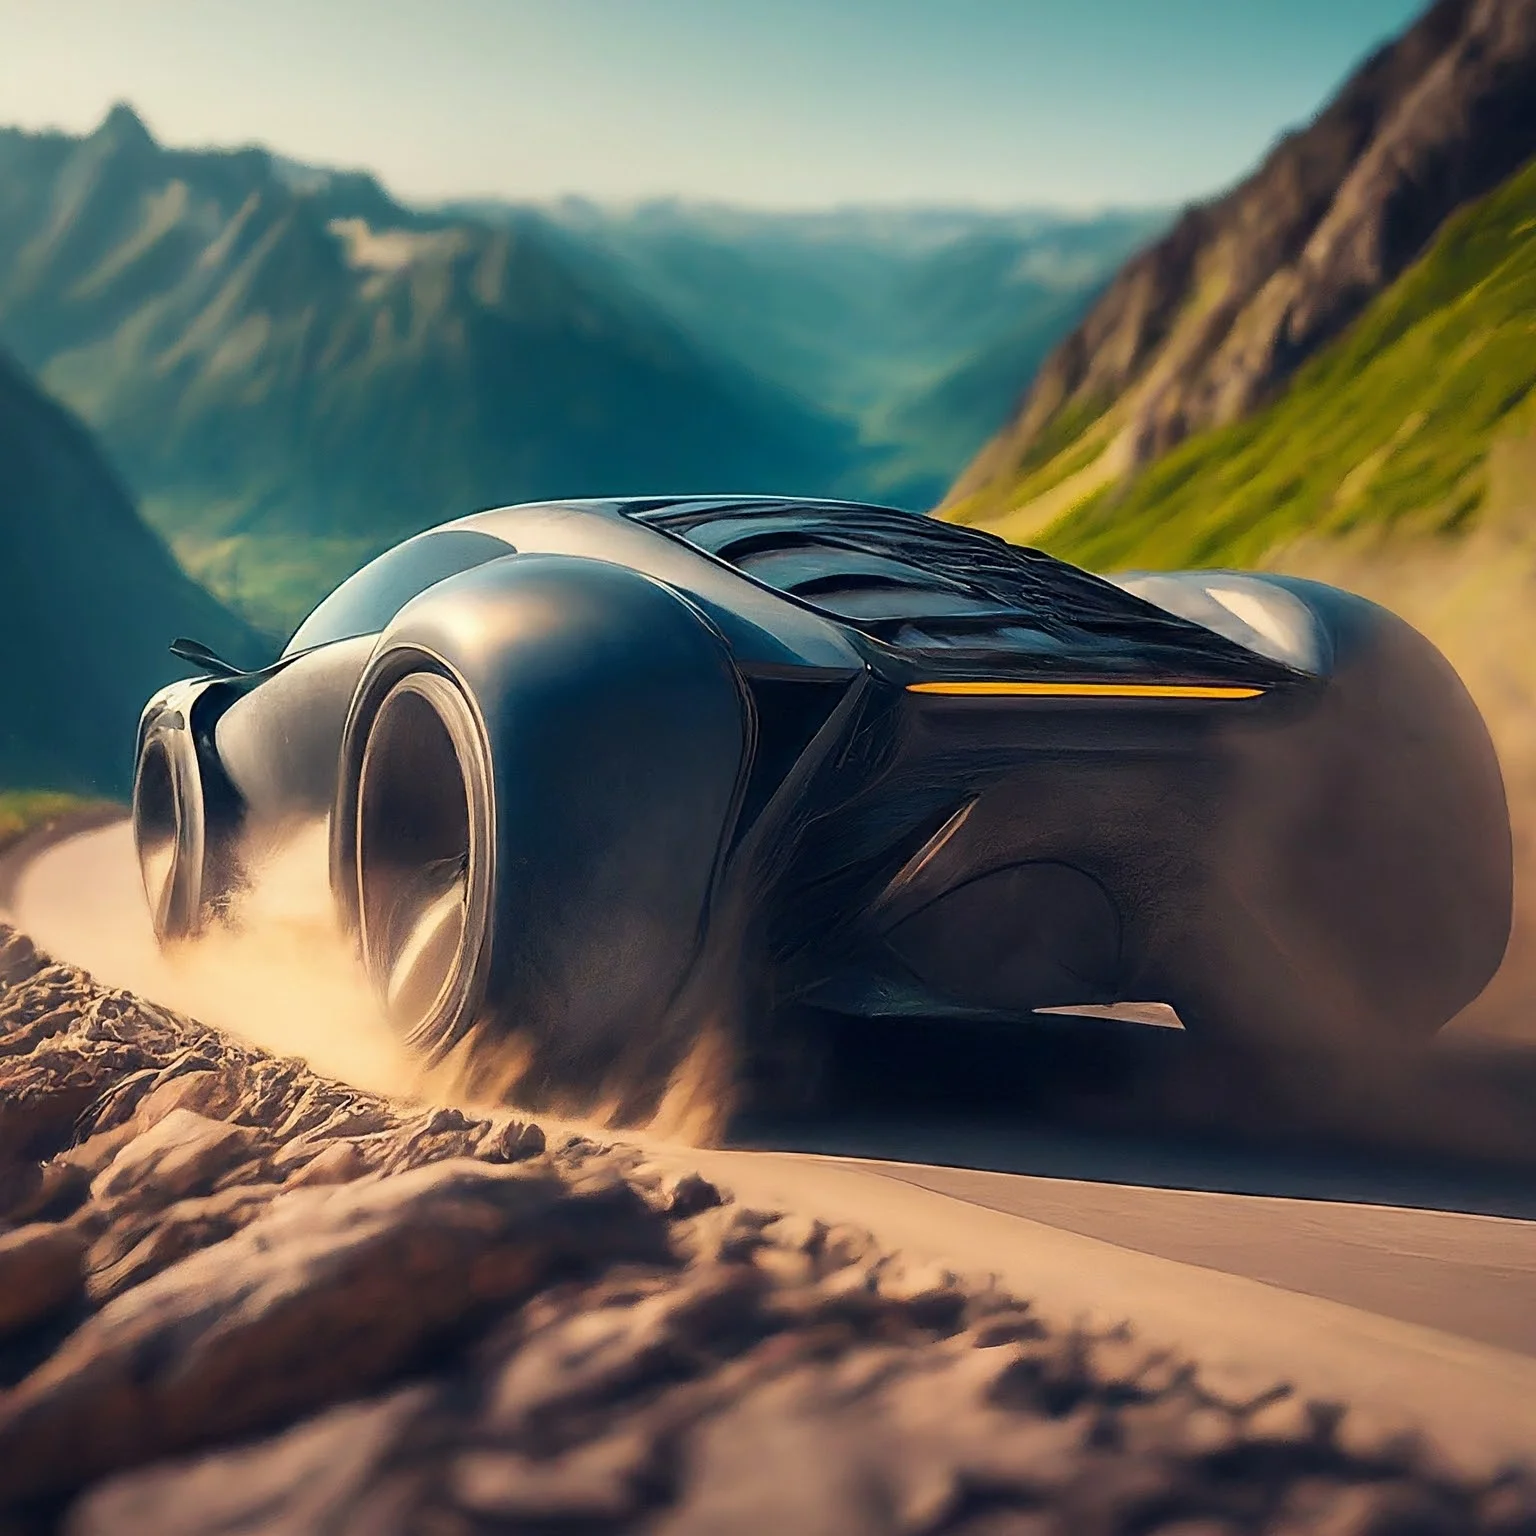 A futuristic automobile driving on a dirt road through the mountains.